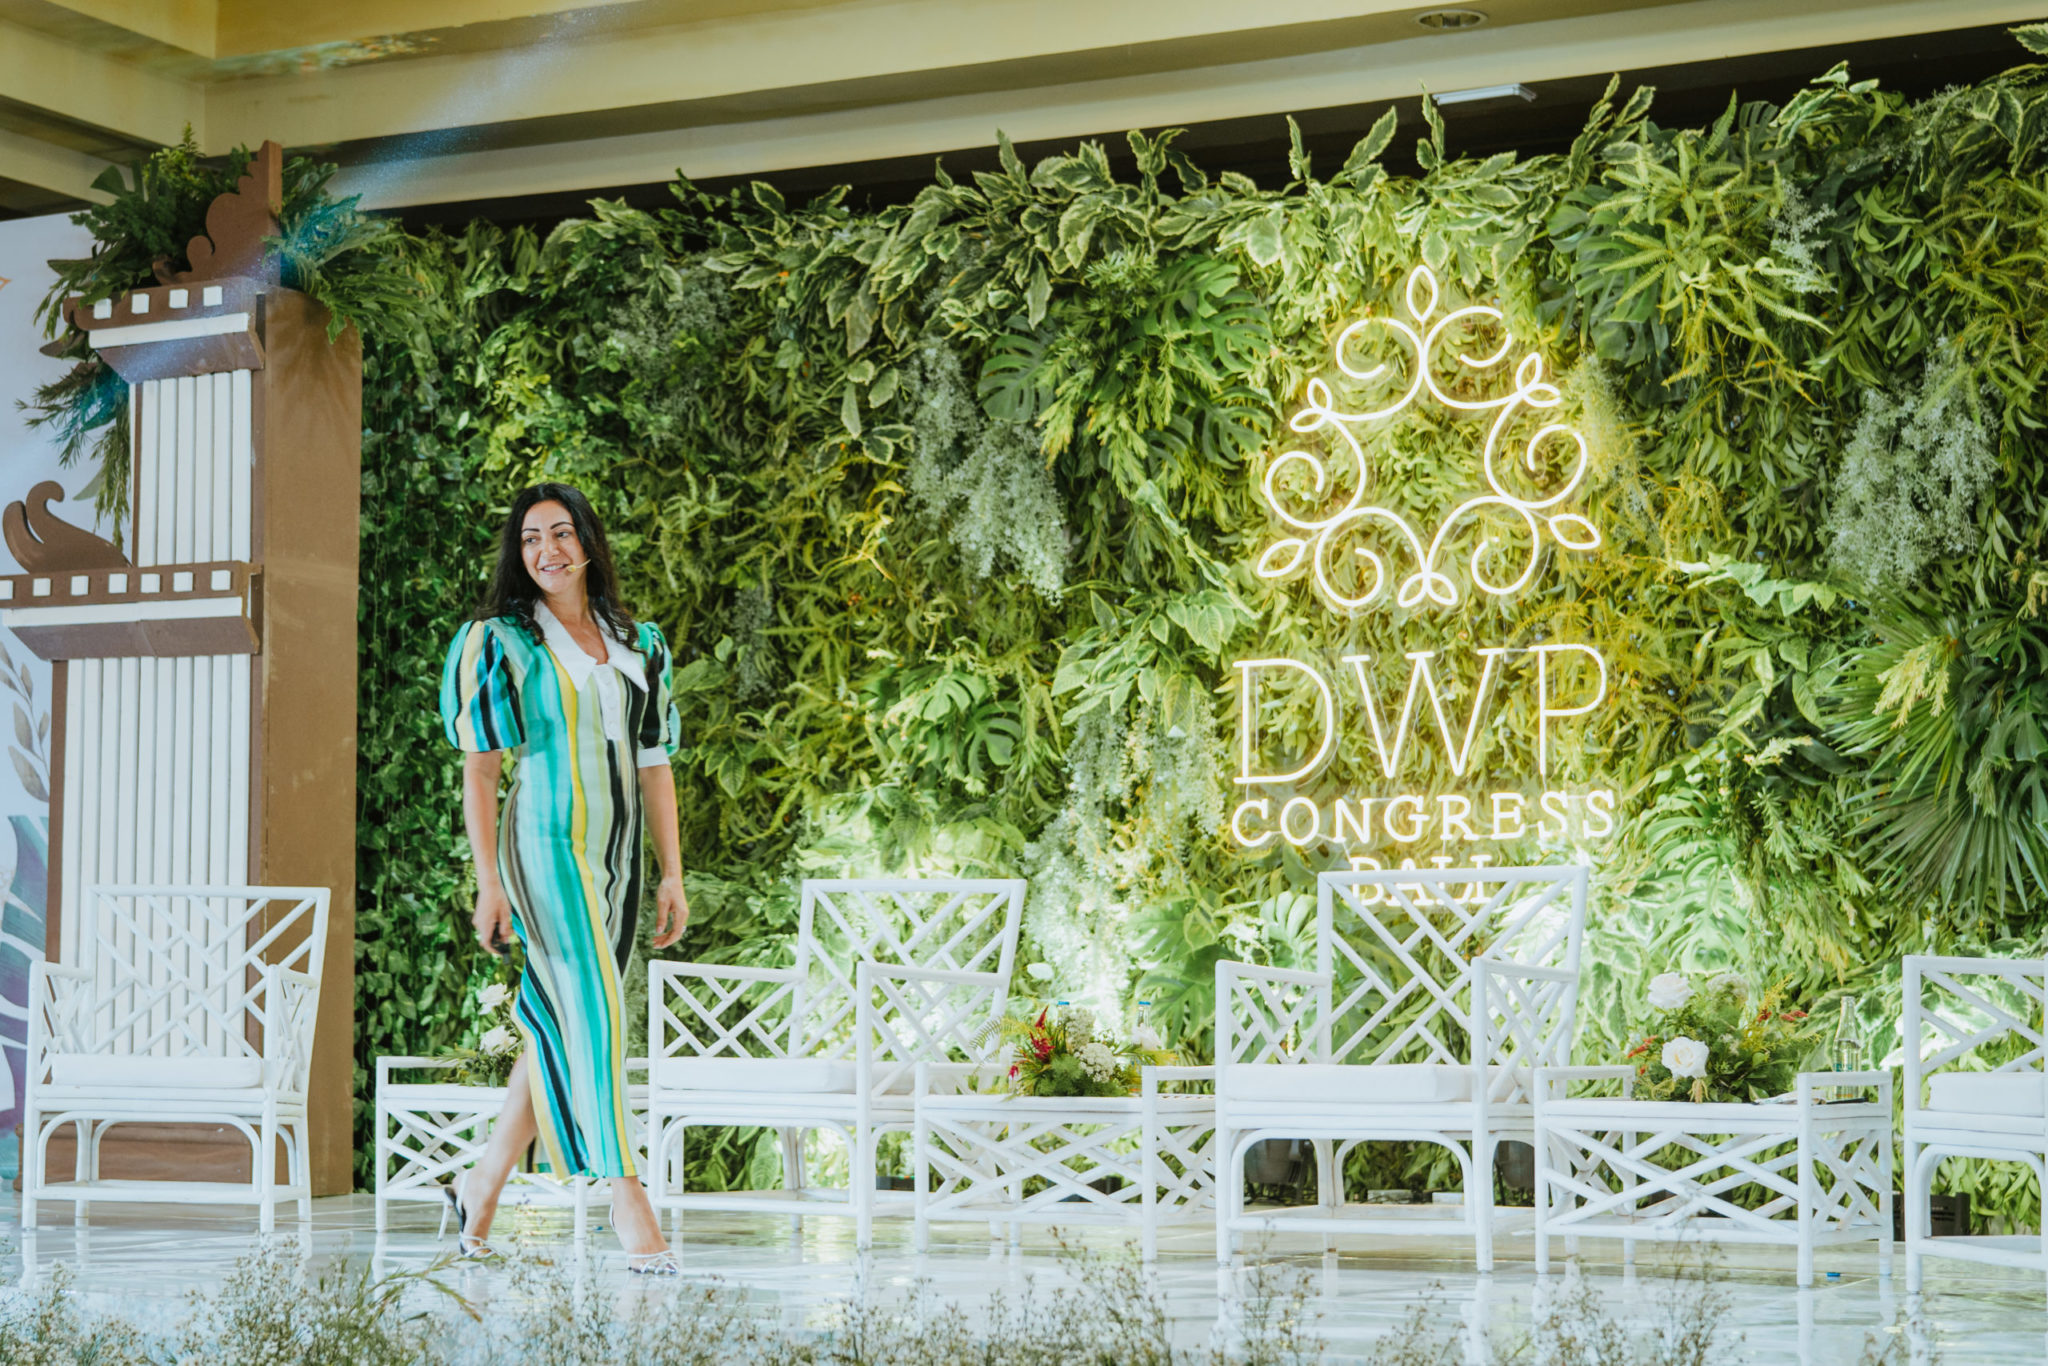 DWP Congress Hosts Its 8th Edition in Bali, Indonesia